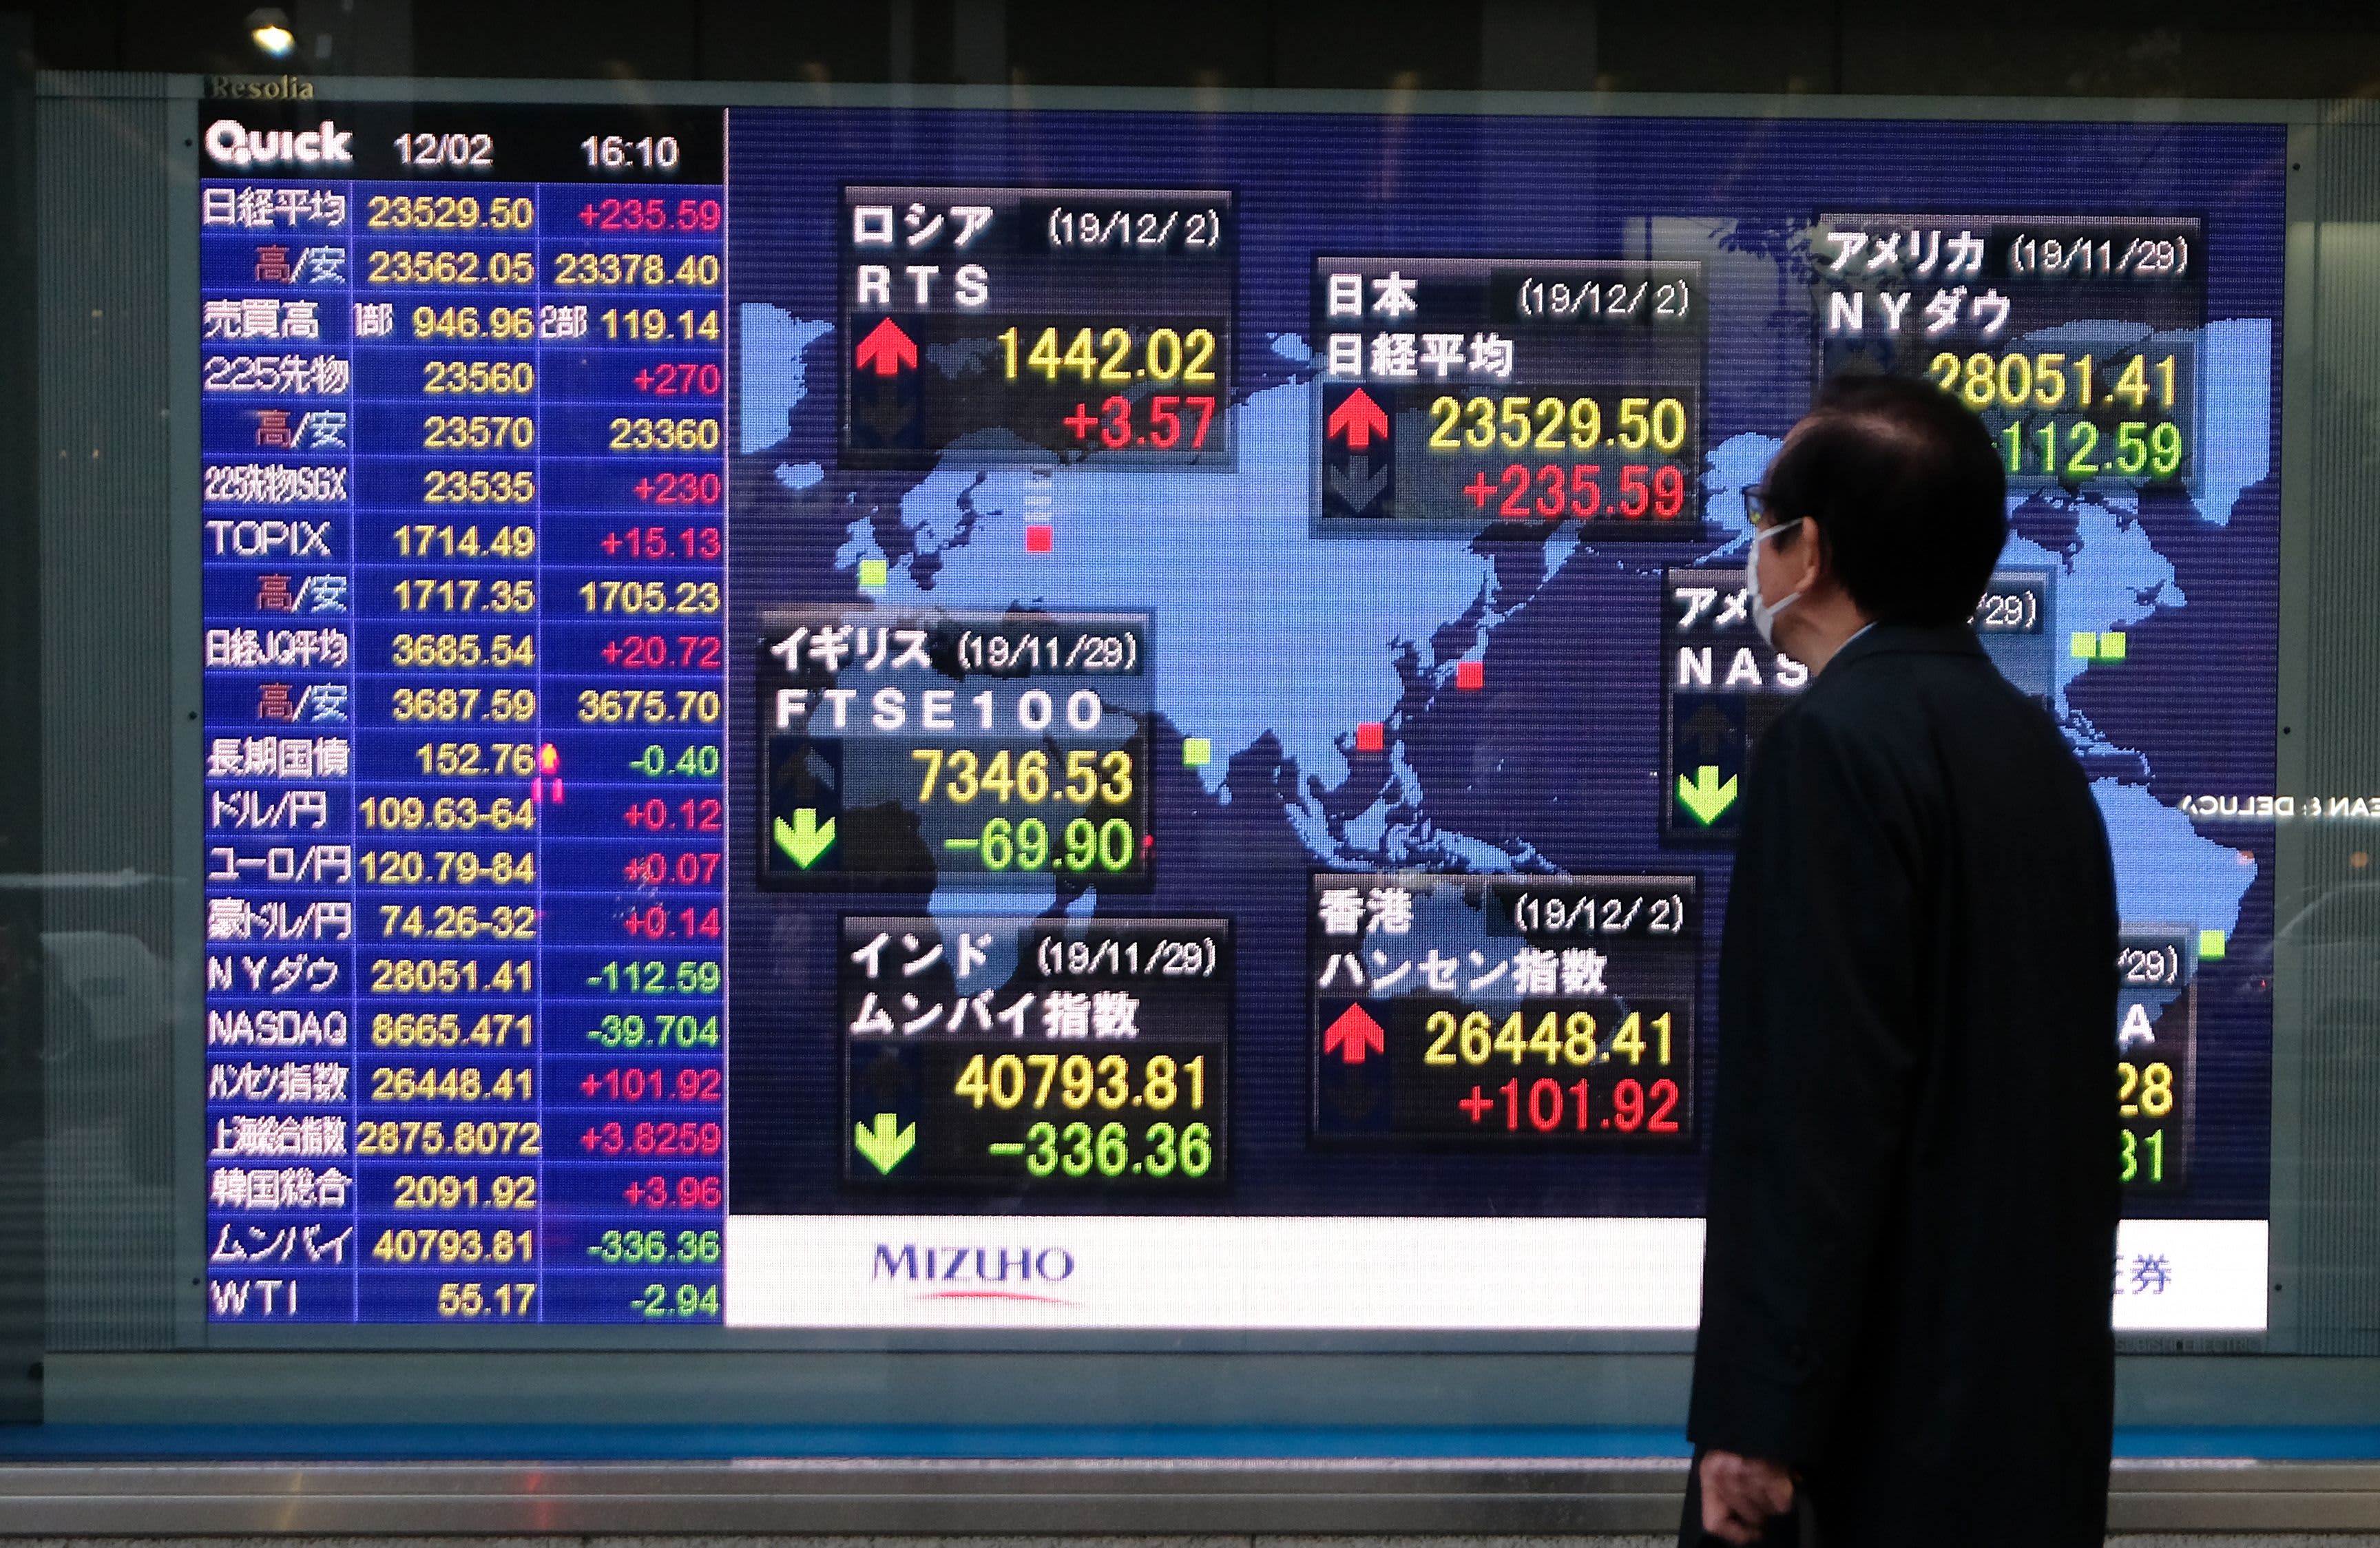 This fund is trouncing the S&P 500 by focusing on international stocks